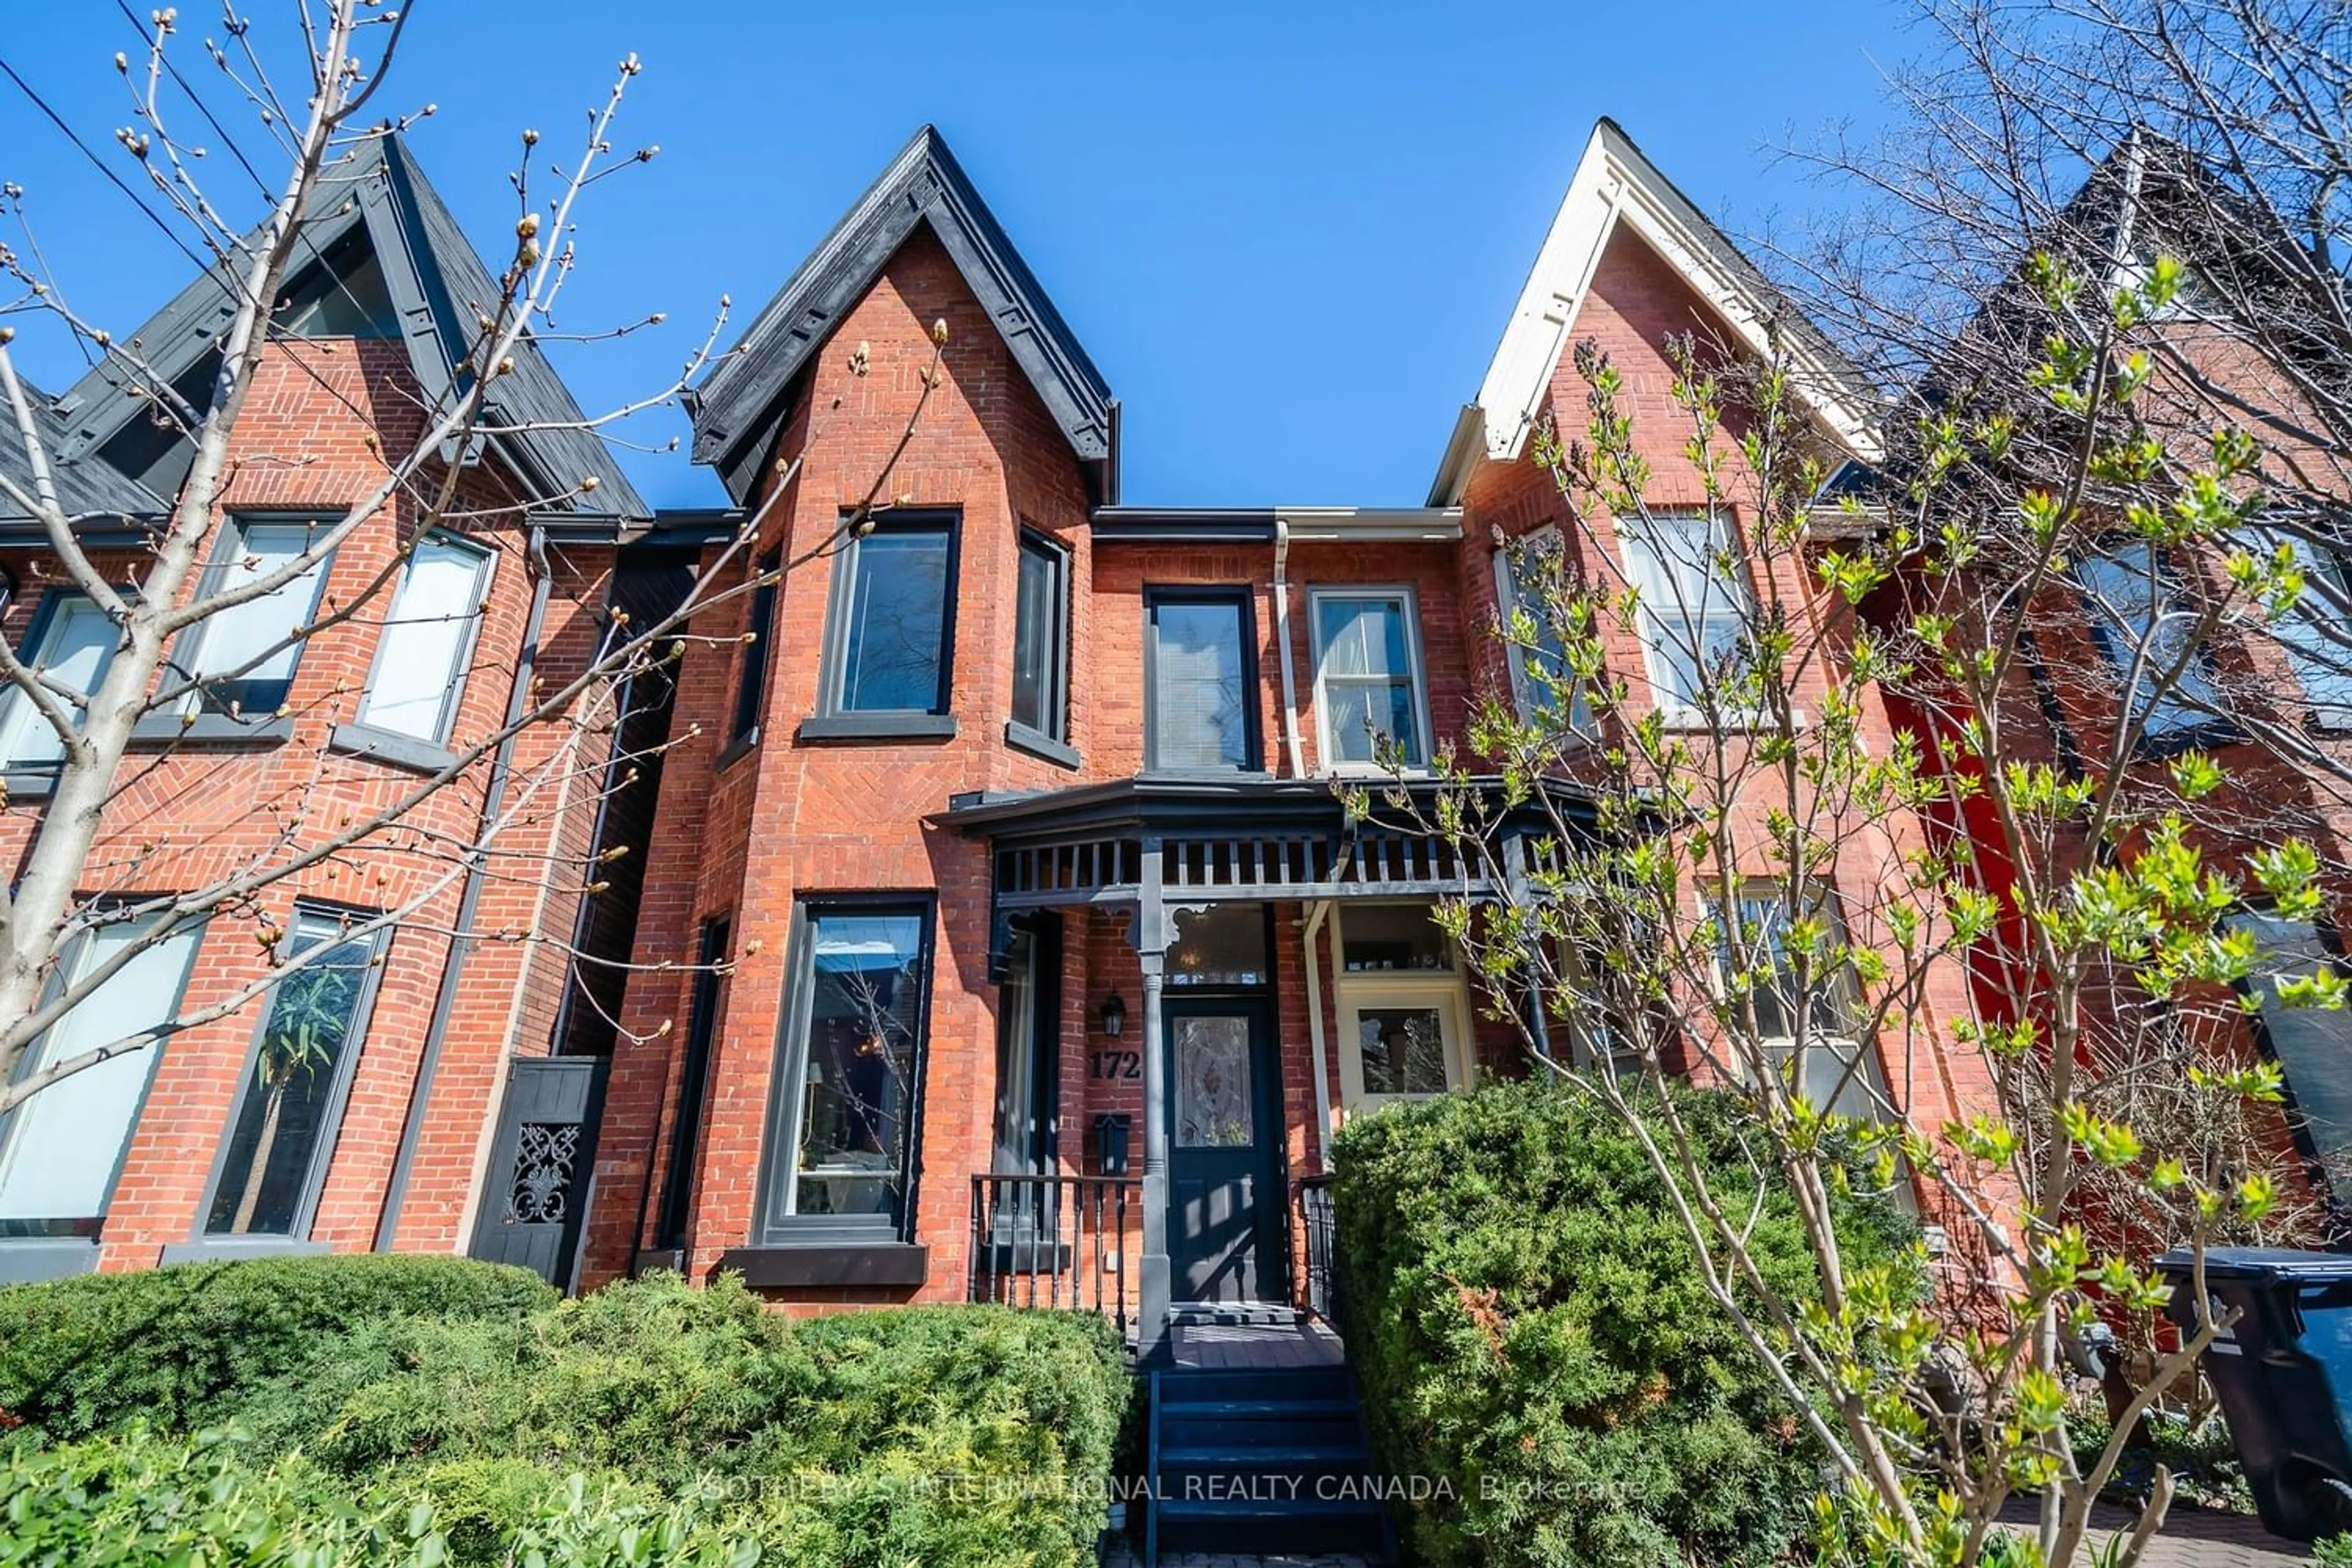 Home with brick exterior material for 172 Macpherson Ave, Toronto Ontario M5R 1W8